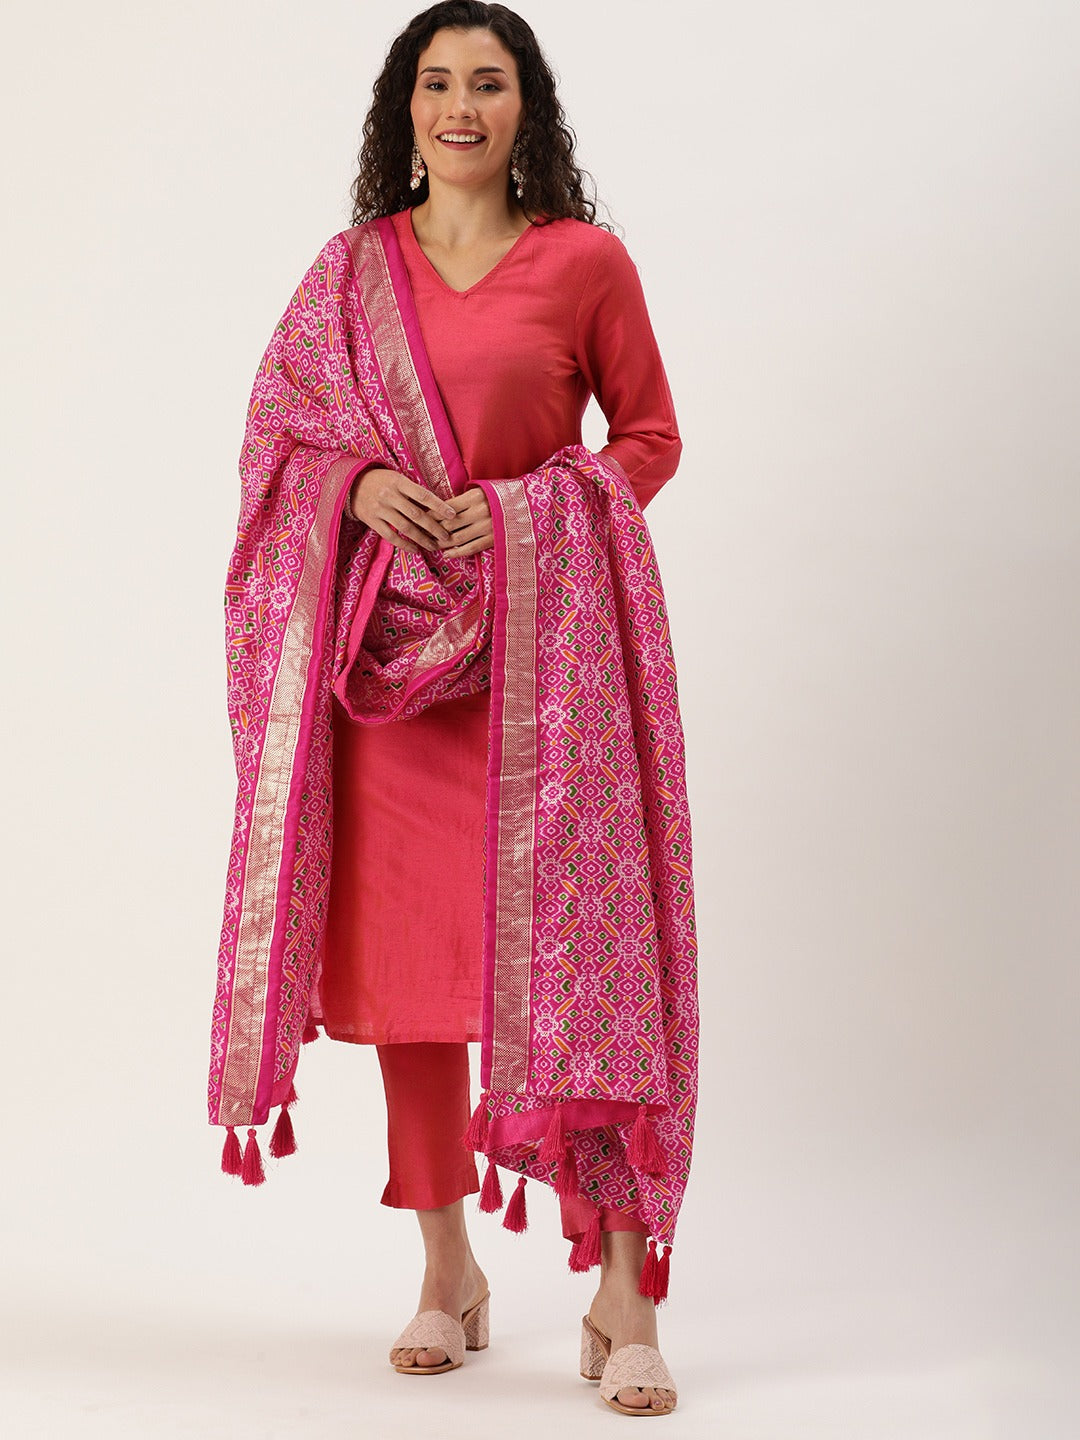 Tussar Silk Patola Print with Foil Work only Dupatta